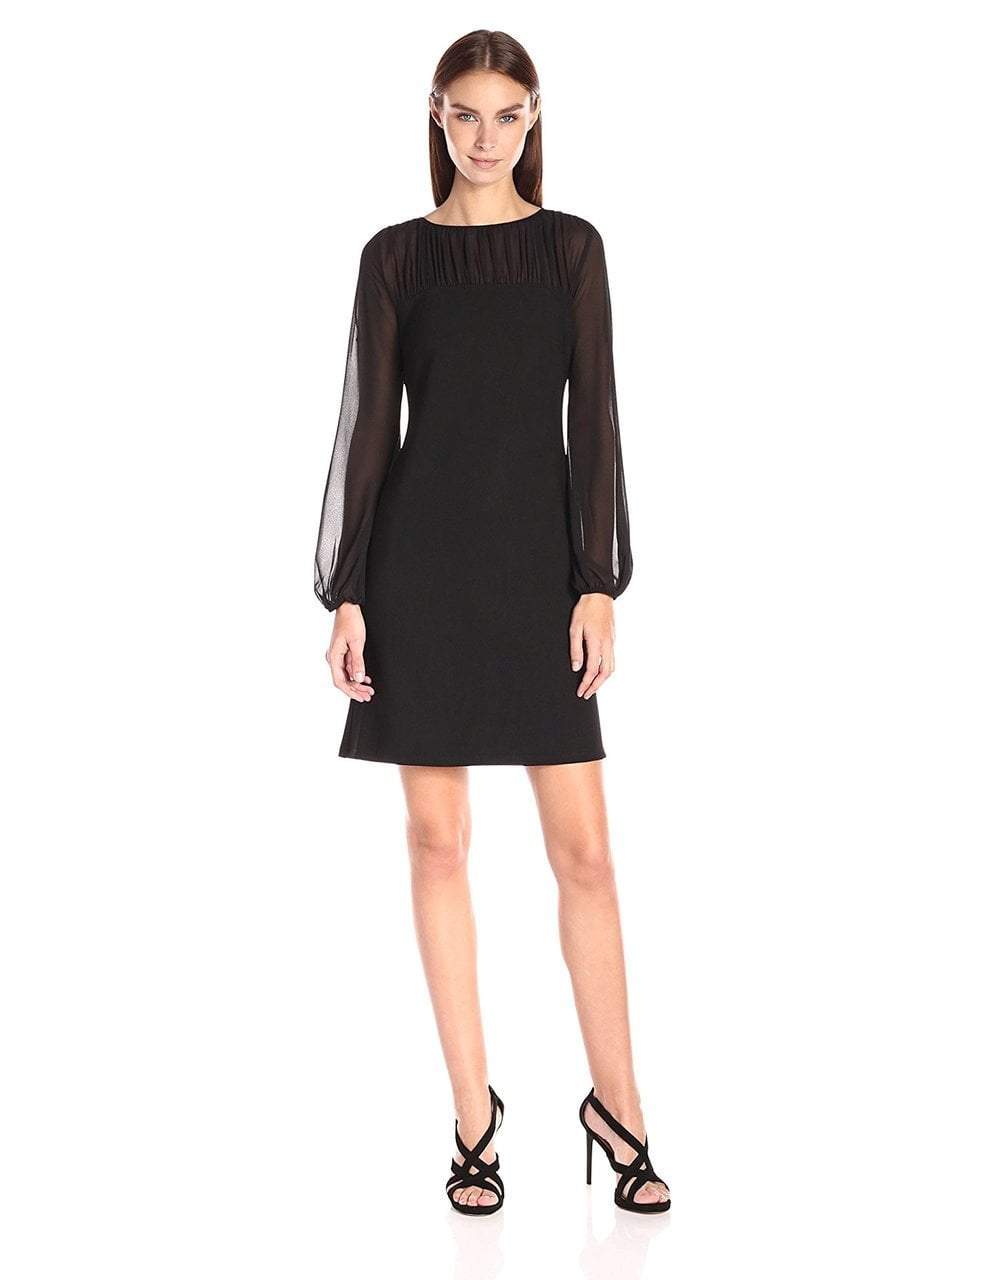 Taylor - Chiffon and Jersey Long Sleeve Dress 5915M in Black